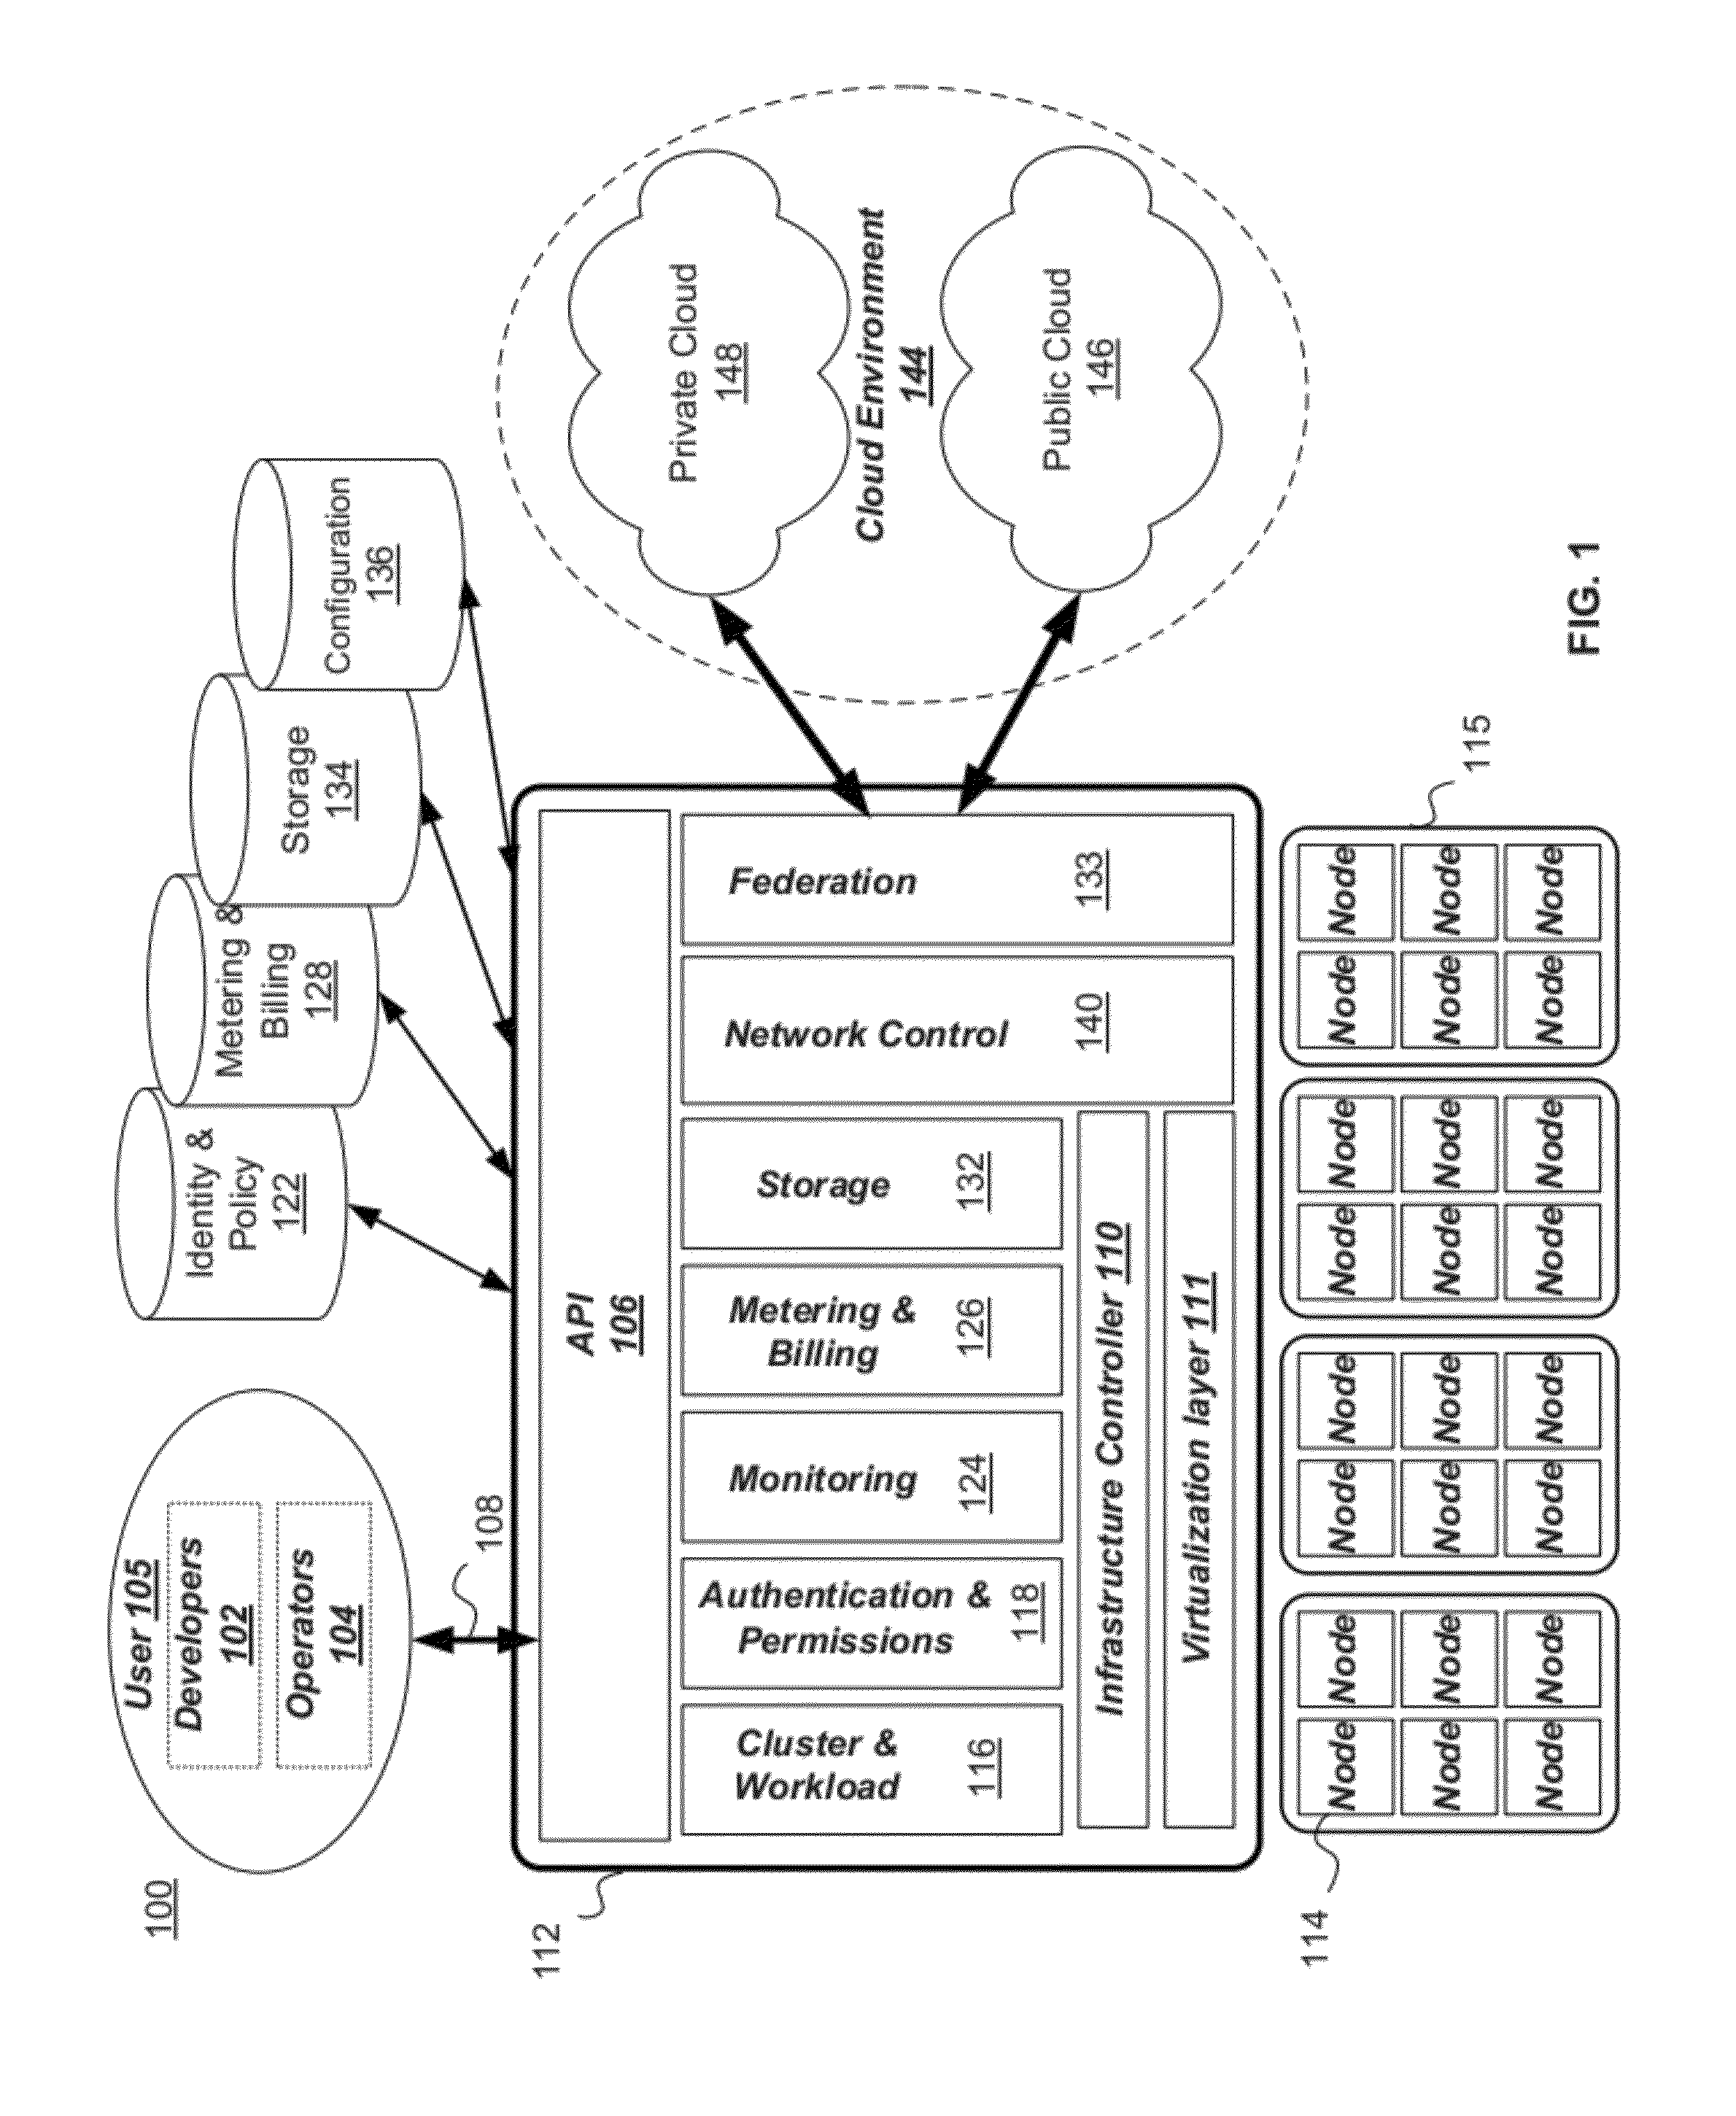 Building a Cloud Computing Environment Using a Seed Device in a Virtual Computing Infrastructure